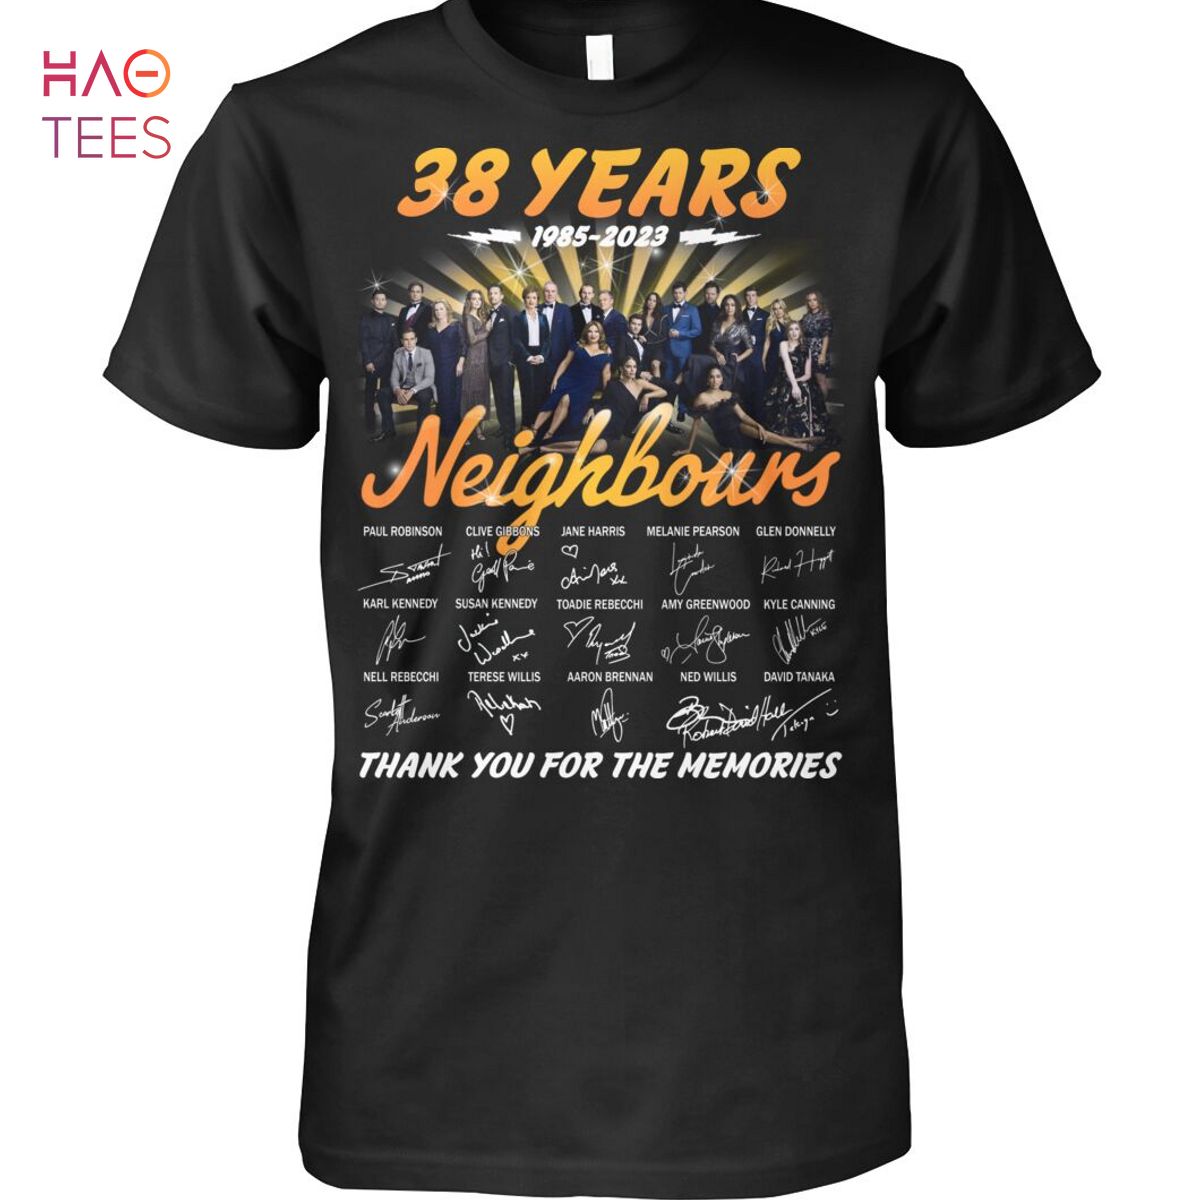 38 Years 1985-2023 Neighbours Shirt Limited Edition